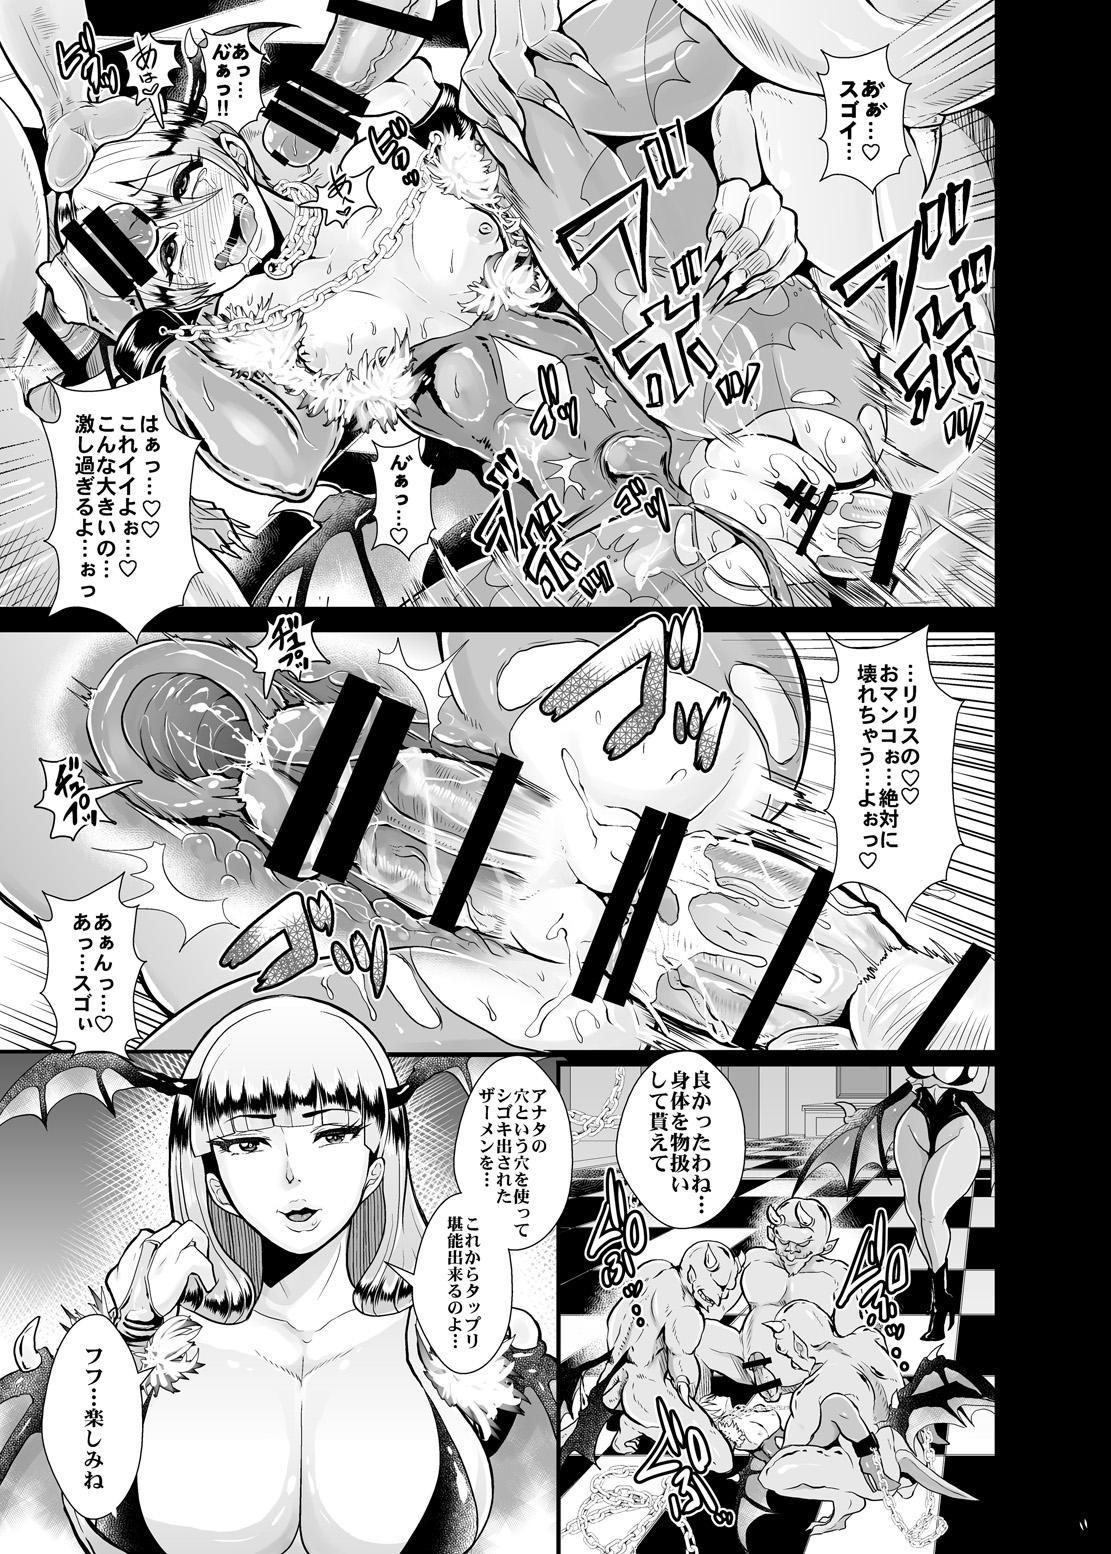 Mamada A lovely toy - Darkstalkers Rough - Page 10